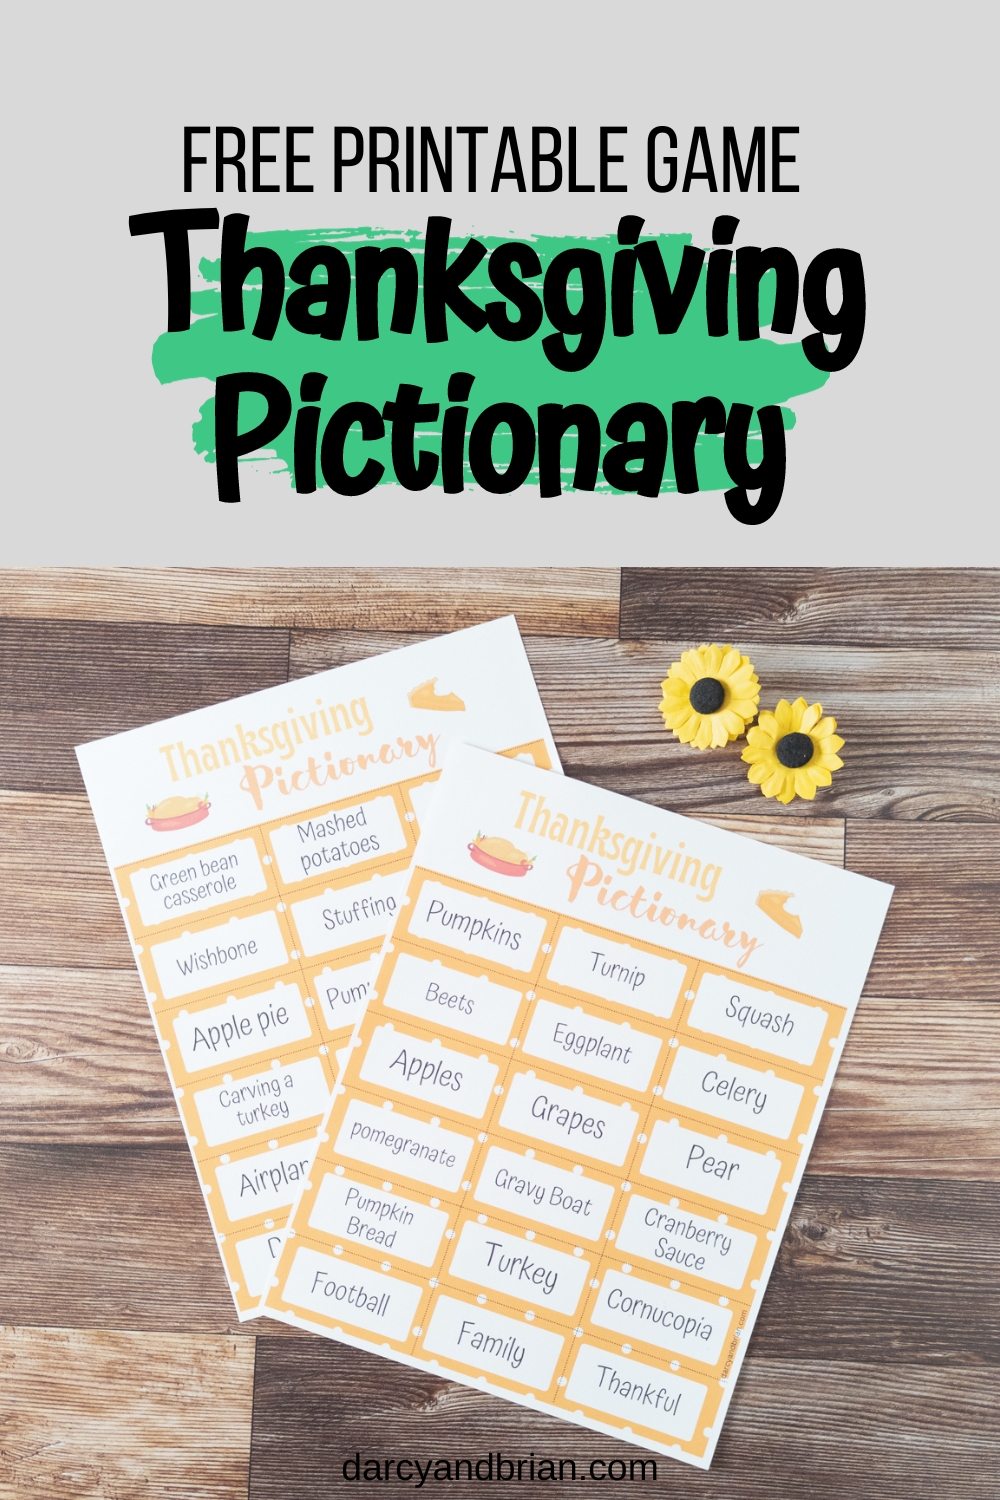 Printable Thanksgiving Pictionary